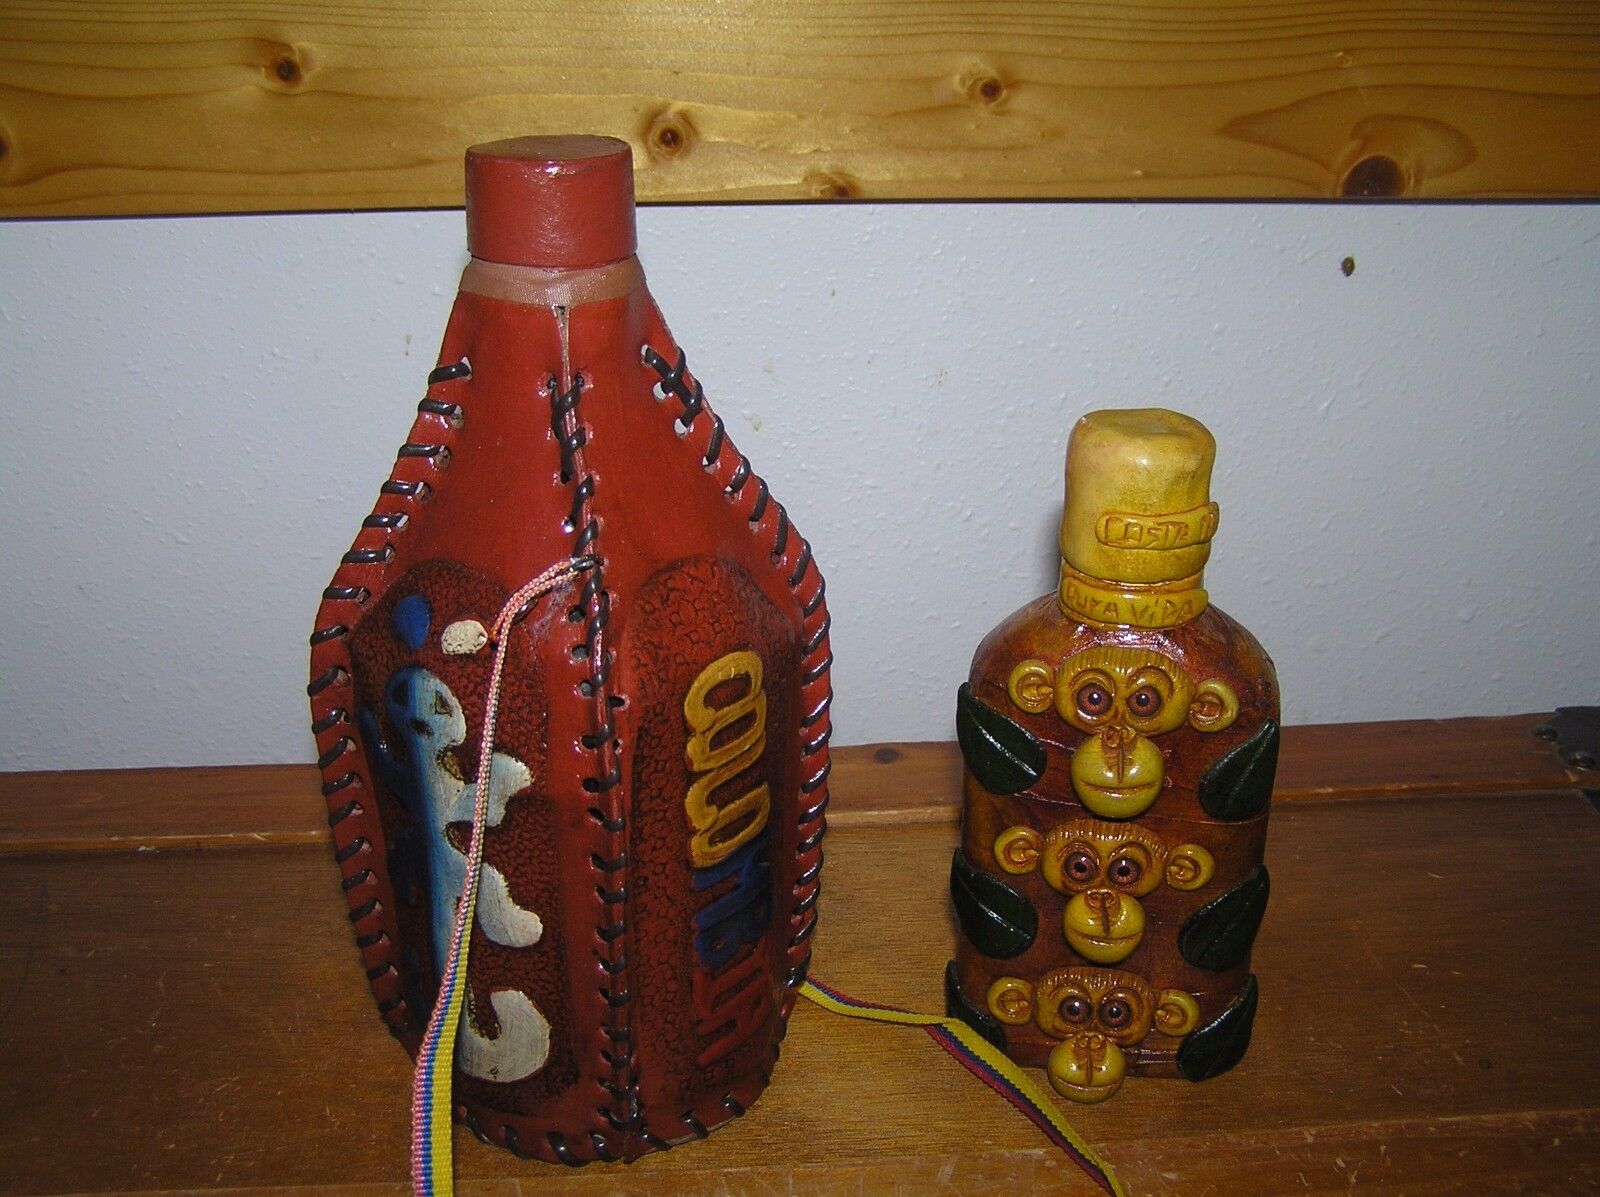 Lot of 2 Costa Rica Three Monkeys Decorated Tooled Leather Parrot Liquor Bottle